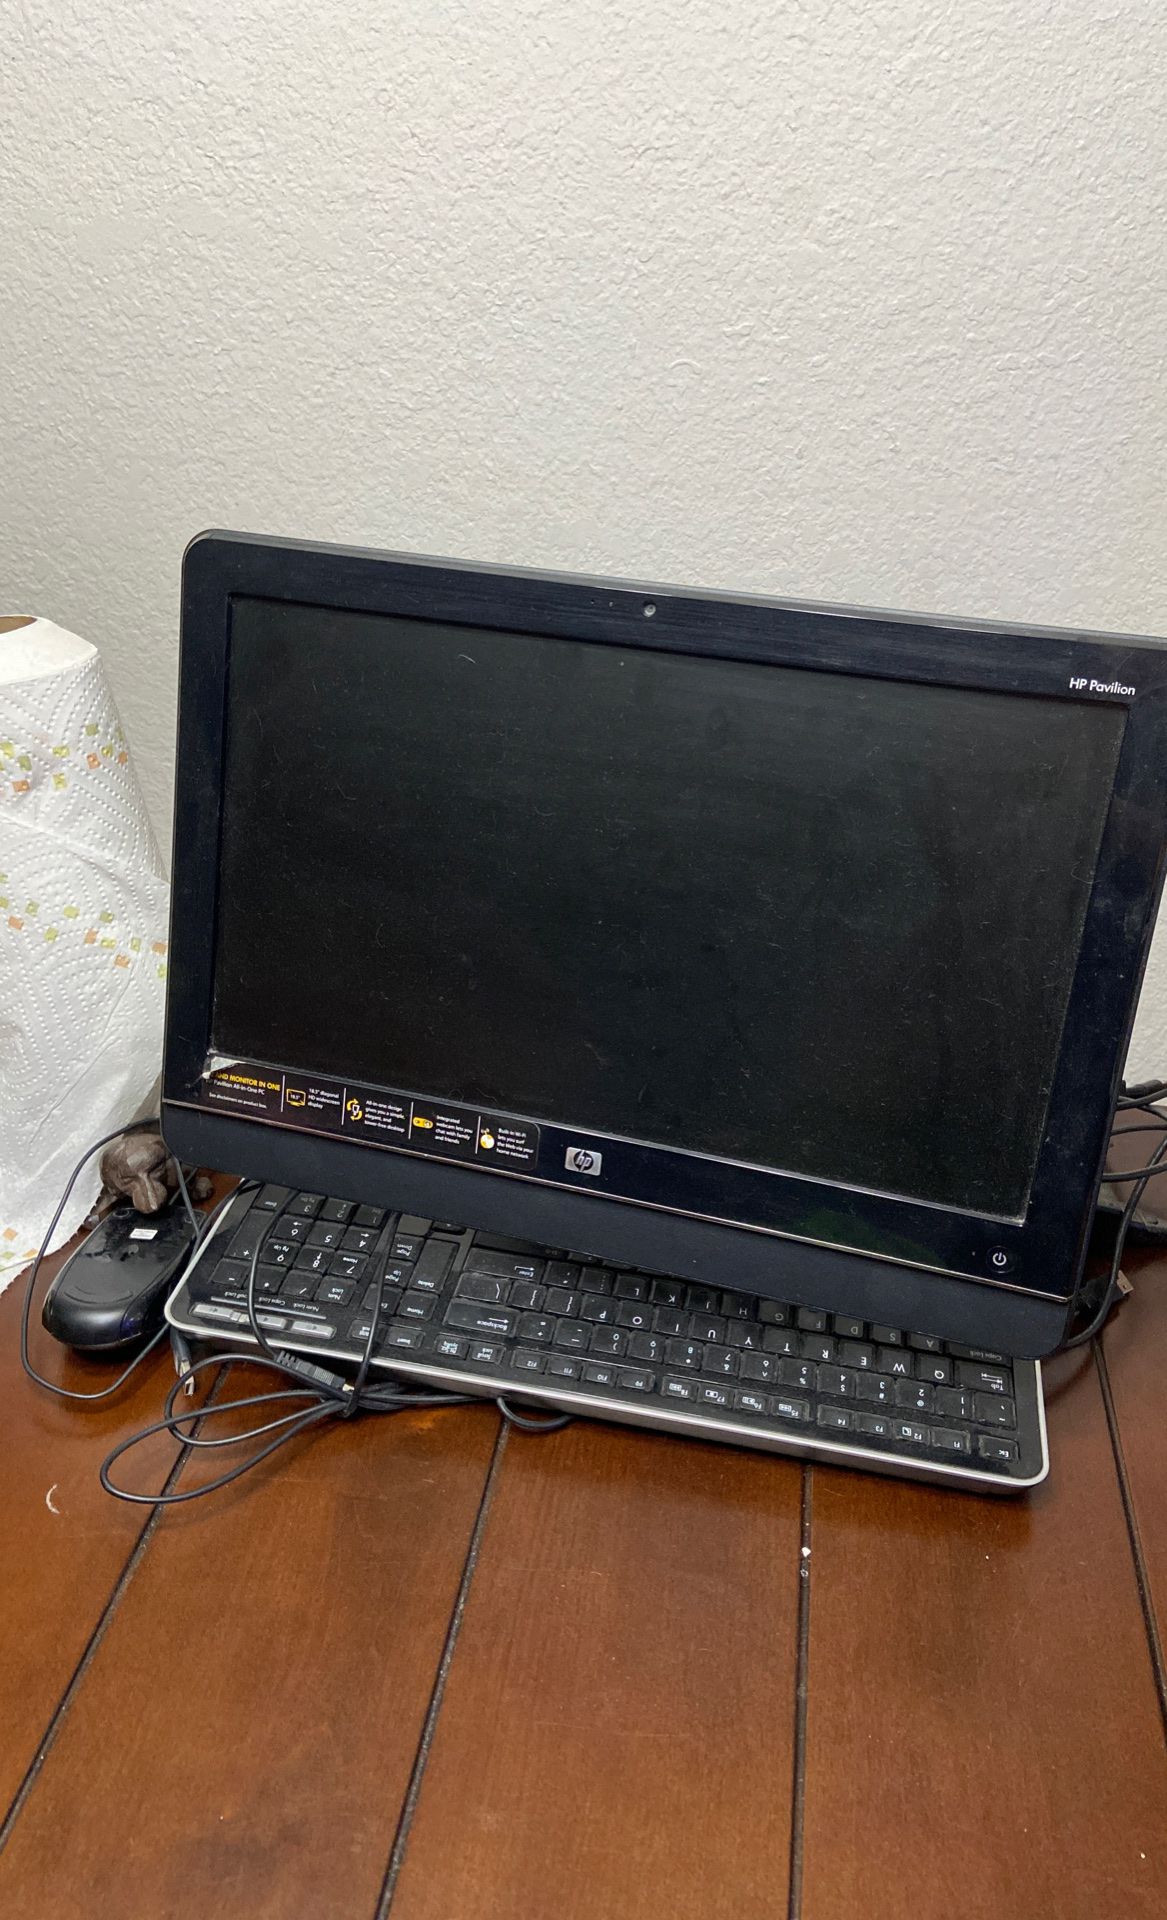 HP computer with keyboard and mouse